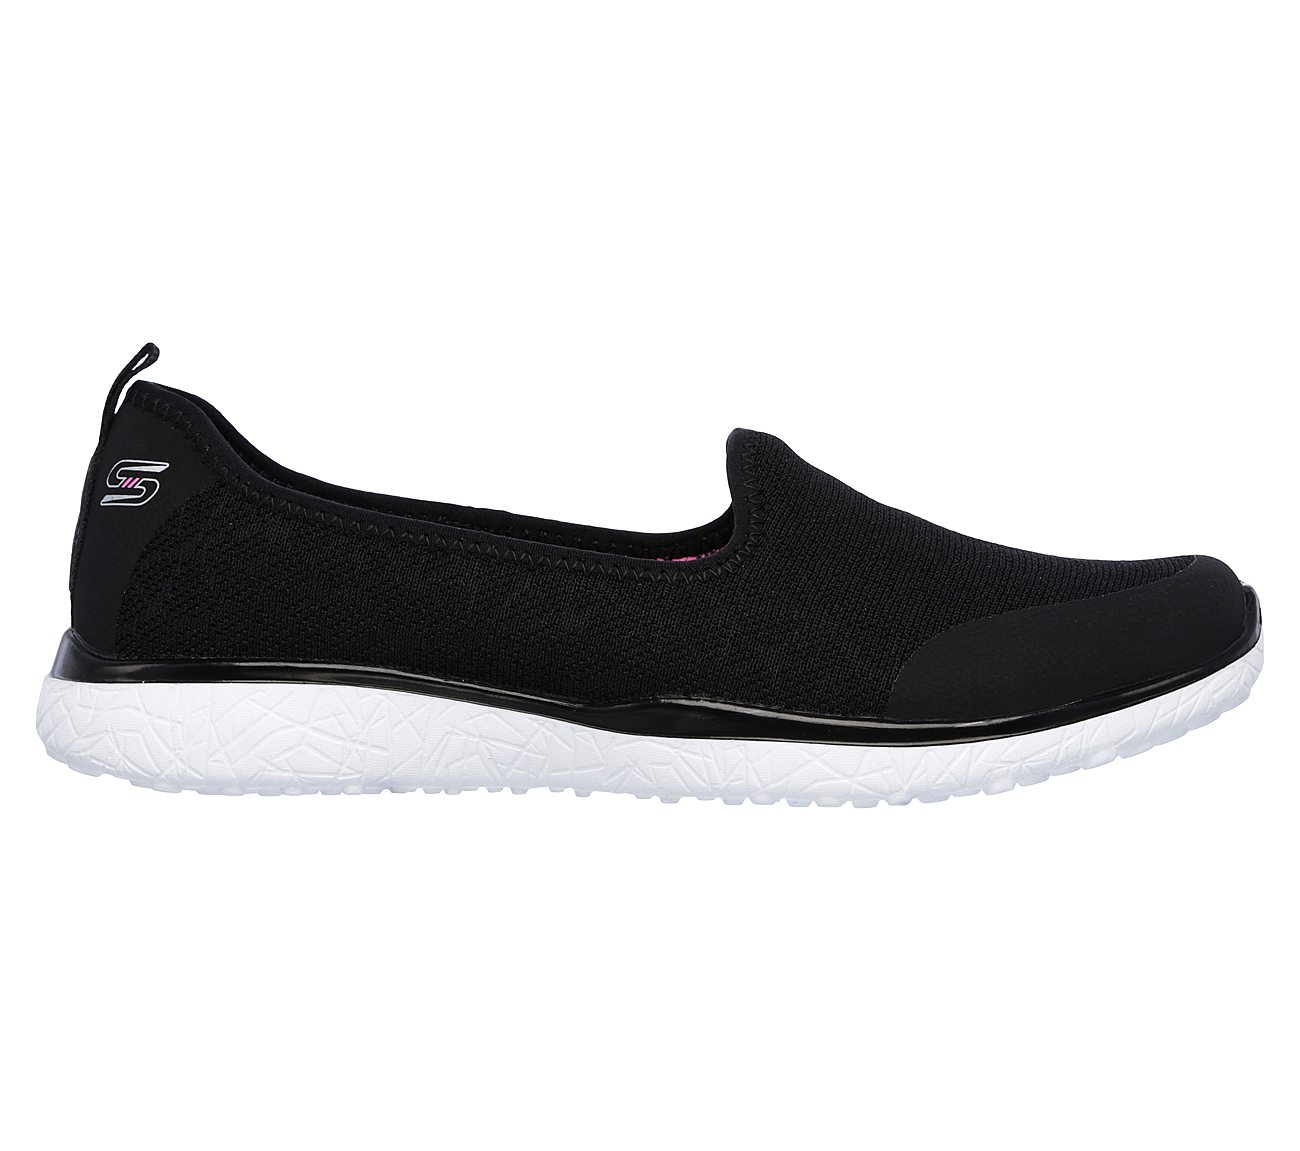 Buy SKECHERS Microburst - It's My Life Comfort Shoes Shoes